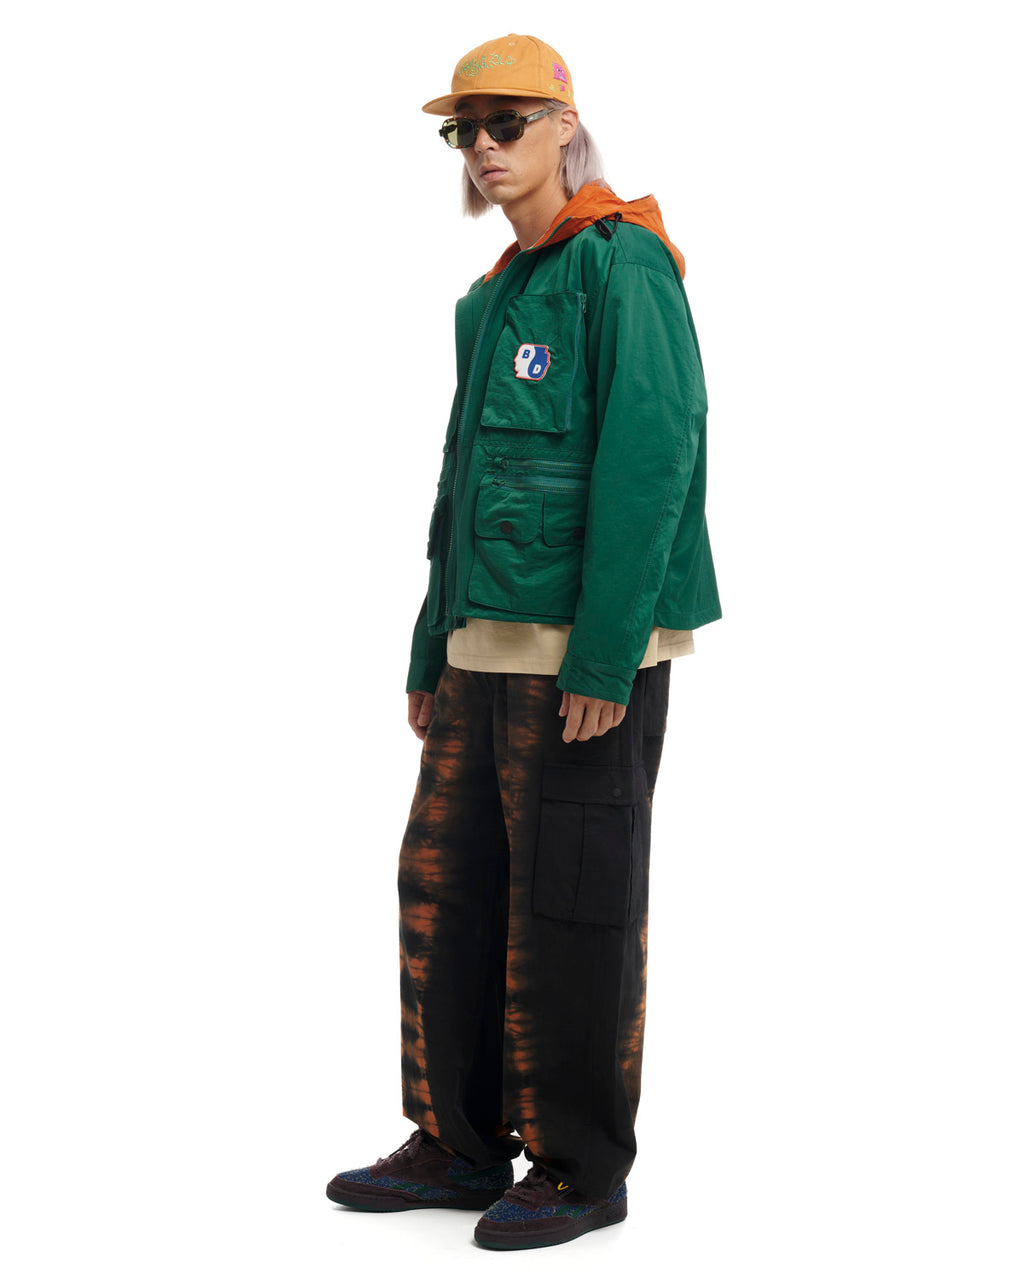 Cropped Hunting Jacket - Green/Terracotta 7